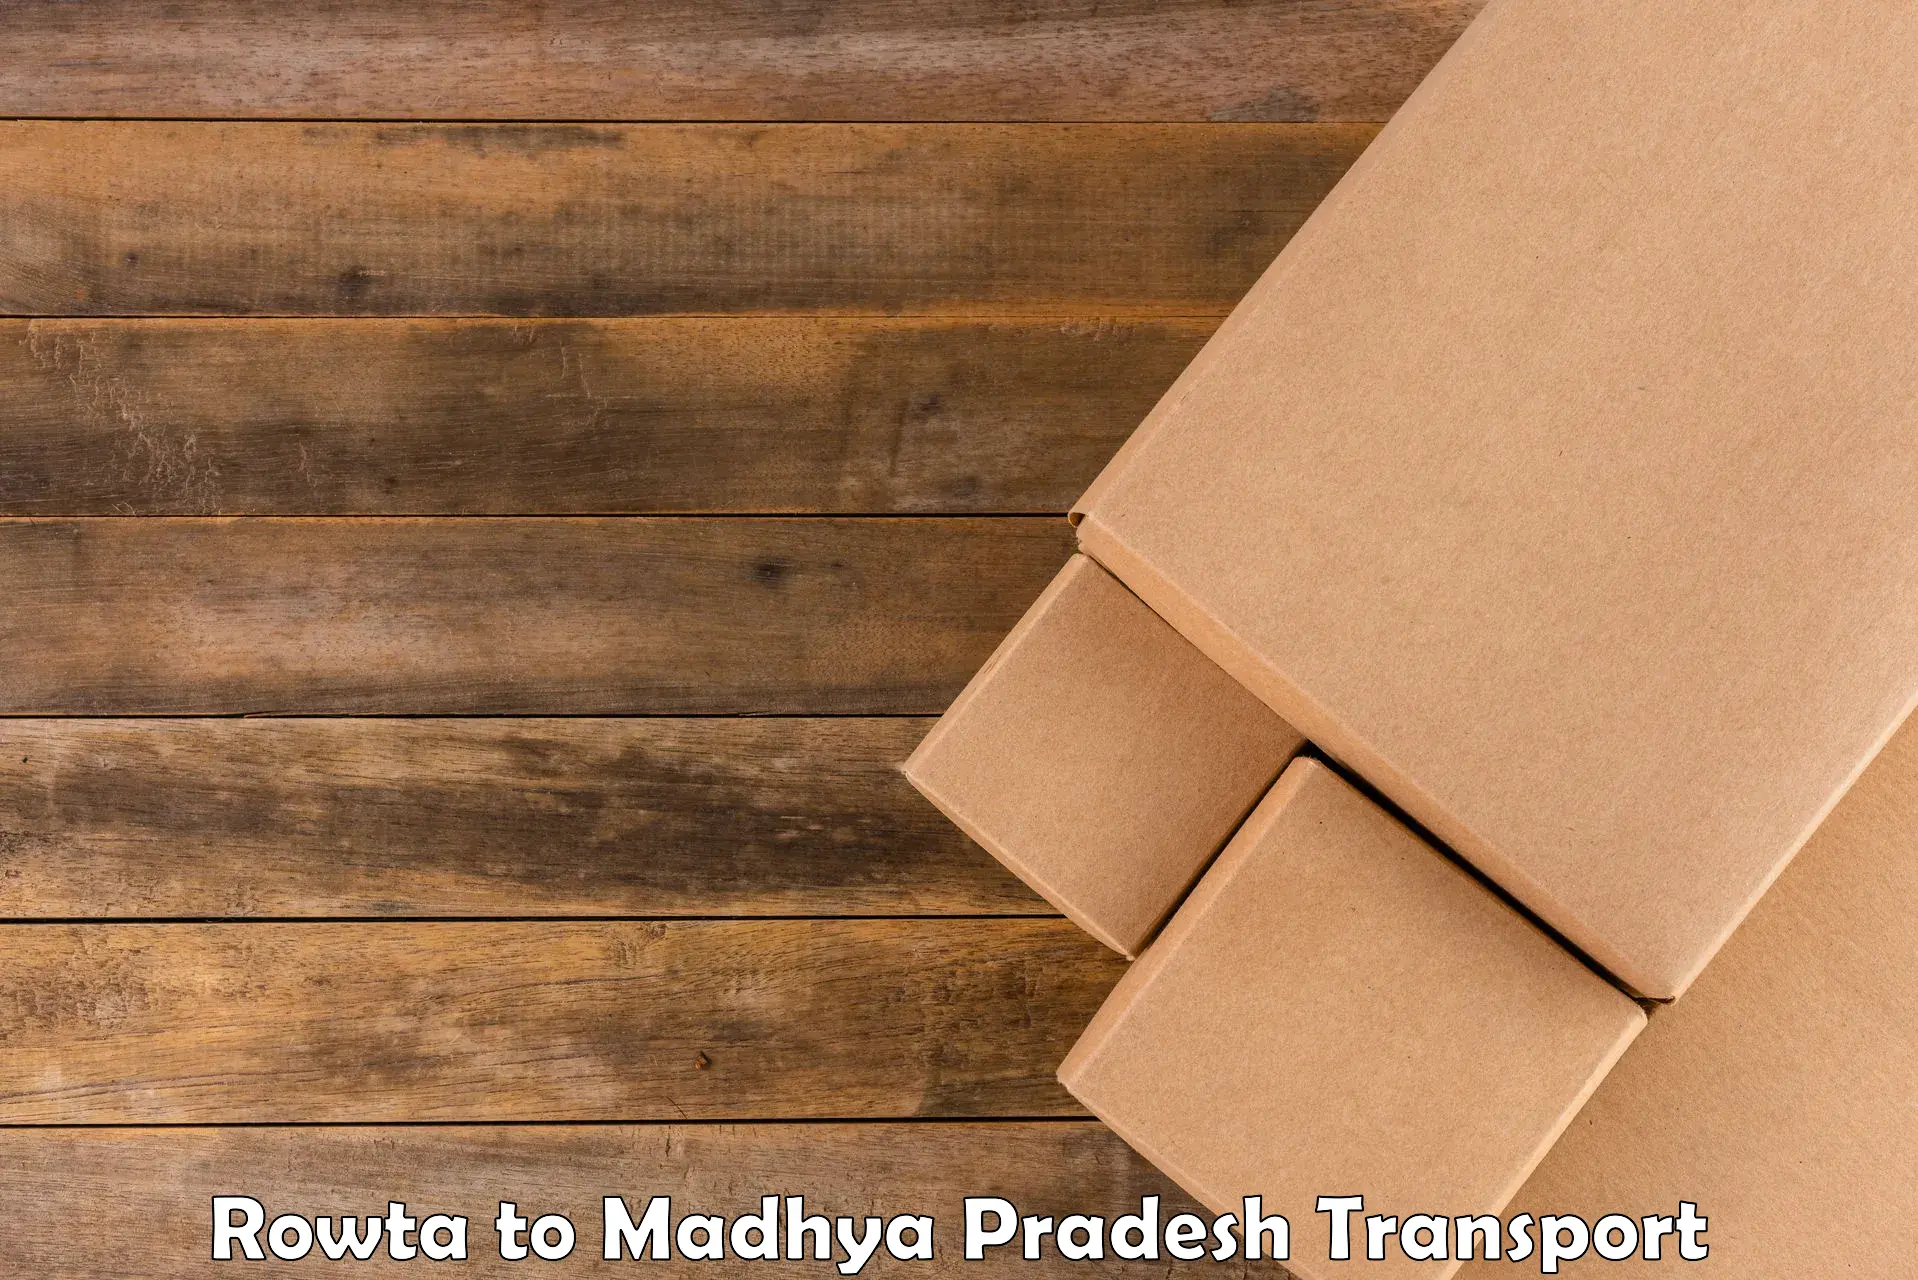 Air freight transport services Rowta to Sehore